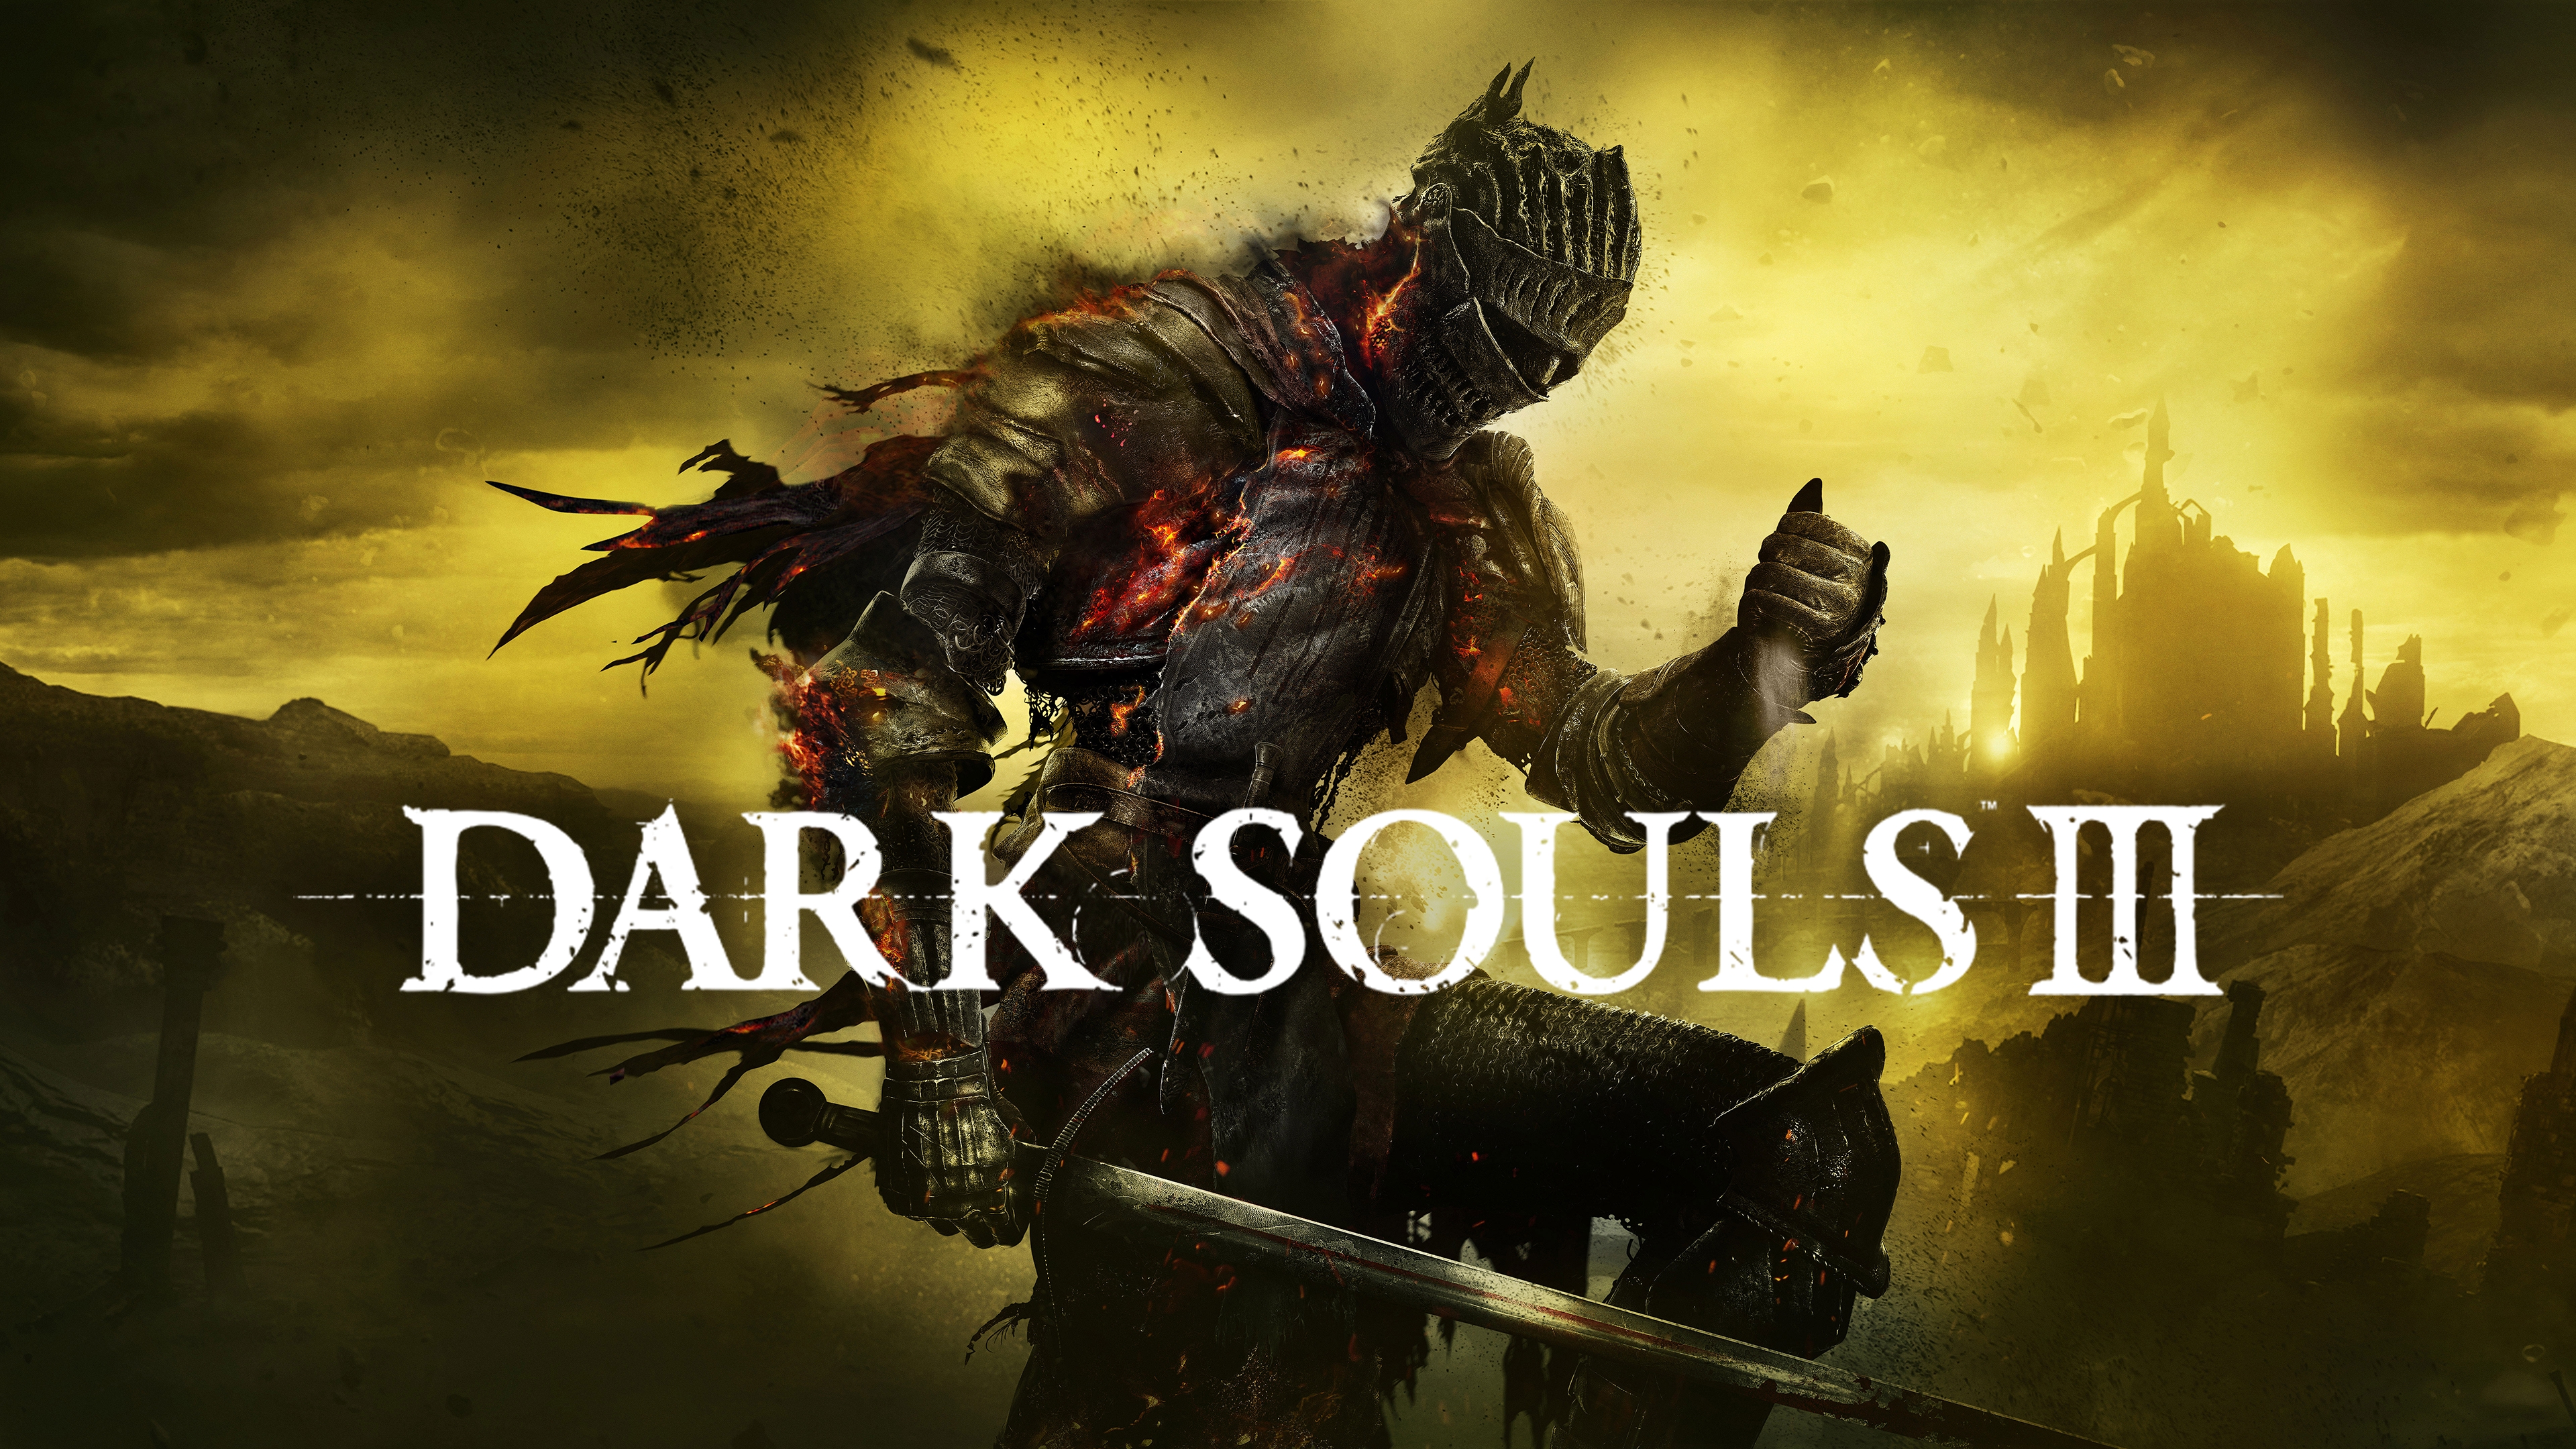 https://gaming-cdn.com/images/products/857/orig/dark-souls-3-pc-game-steam-cover.jpg?v=1703156780